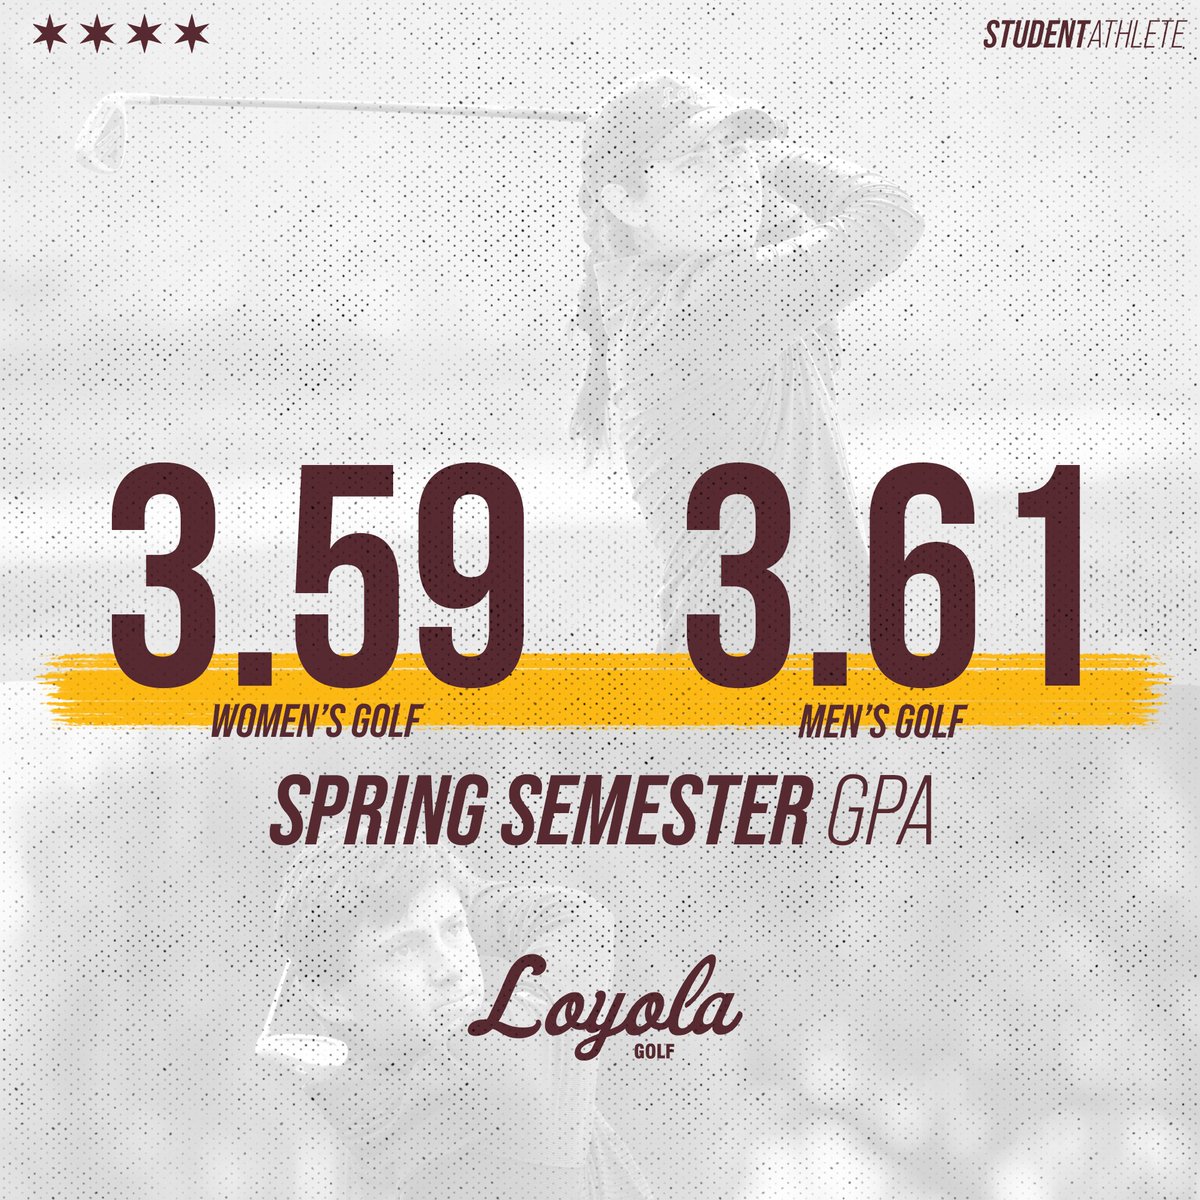 Great job to our student athletes for another semester of hard work in the classroom!

#OnwardLU